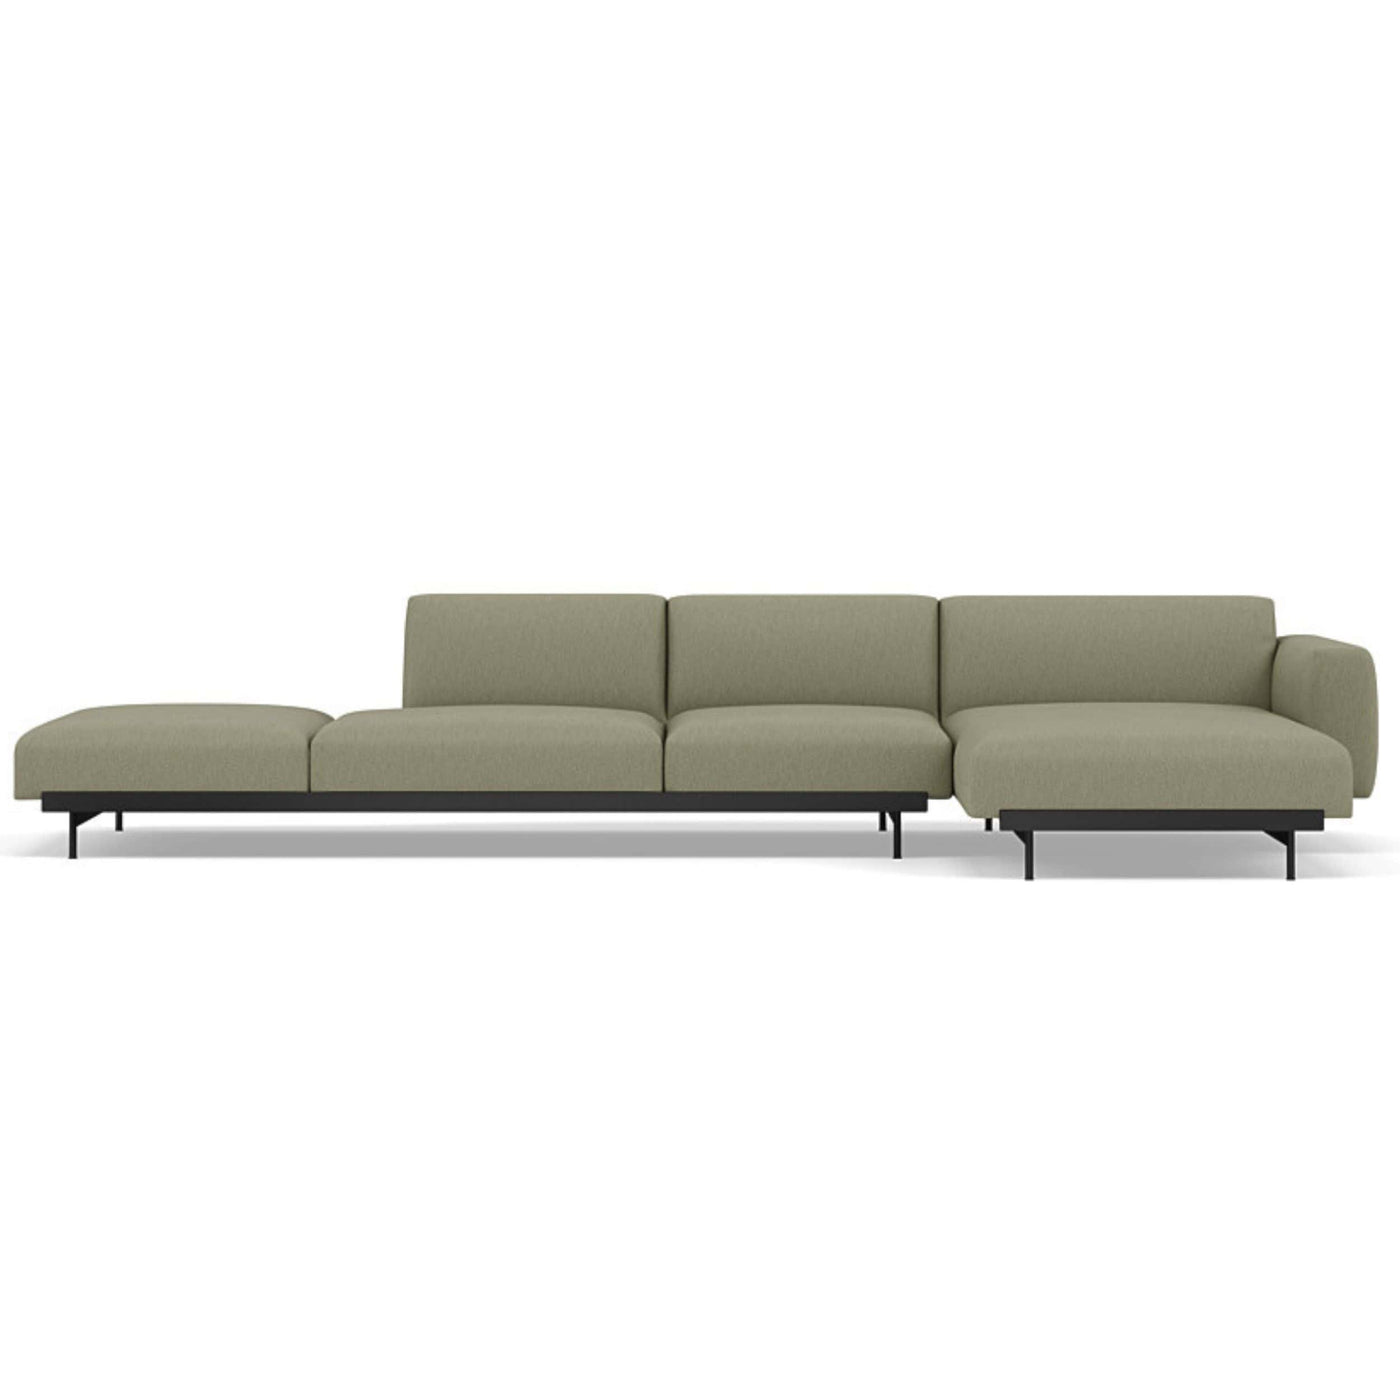 Muuto In Situ Modular 4 Seater Sofa configuration 4 in clay 15. Made to order from someday designs. #colour_clay-15